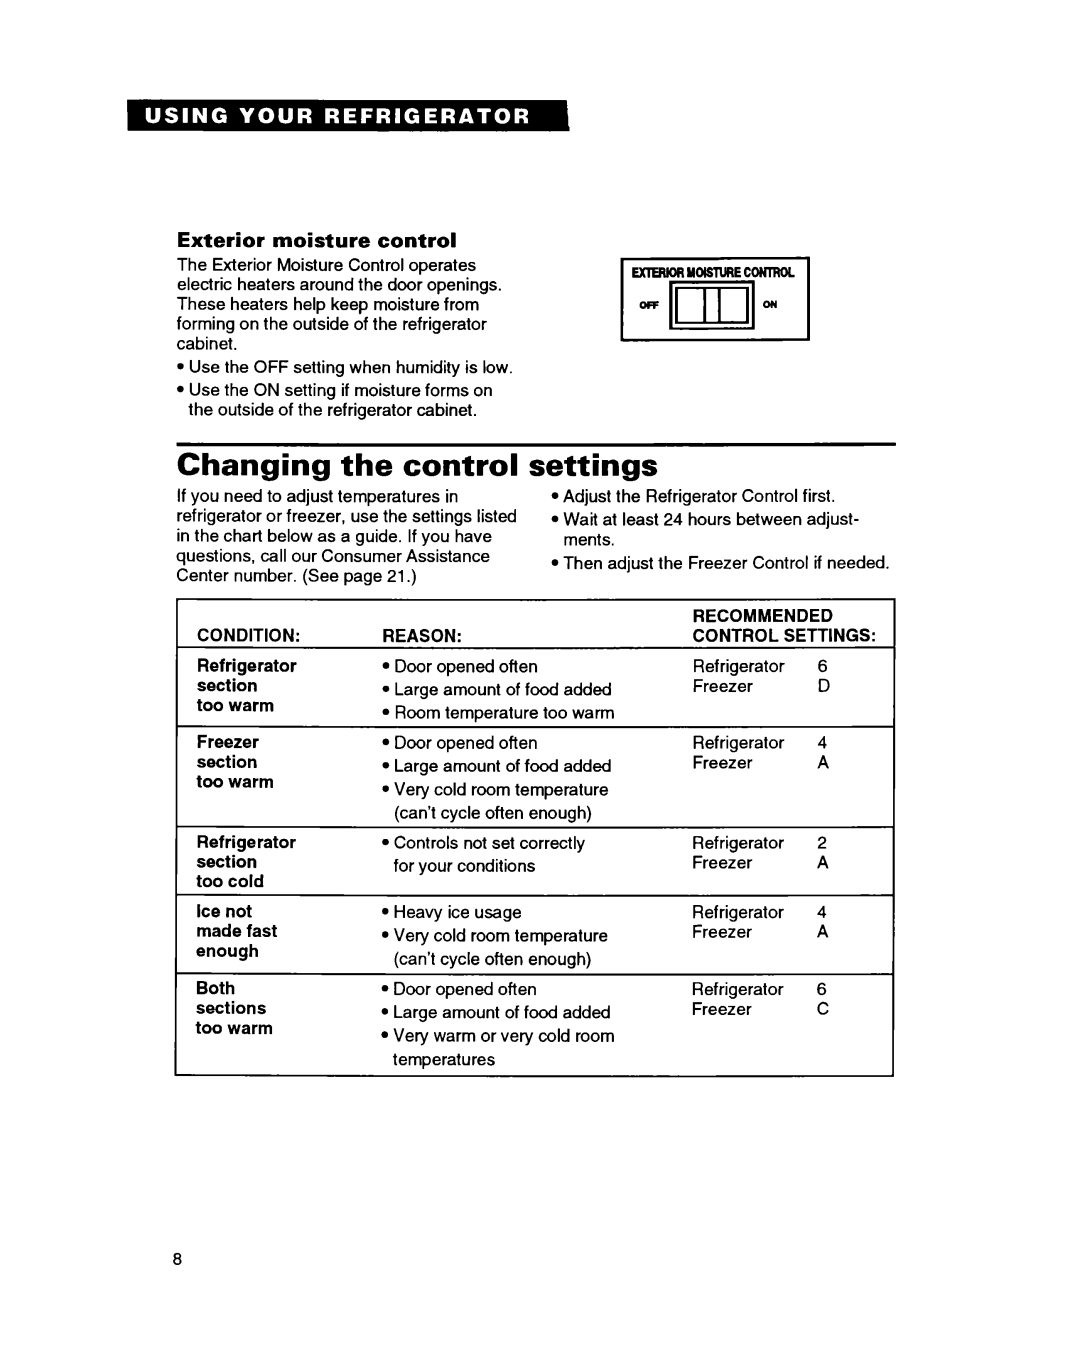 Whirlpool ET18GK warranty Changing the control, settings, Exterior moisture control 